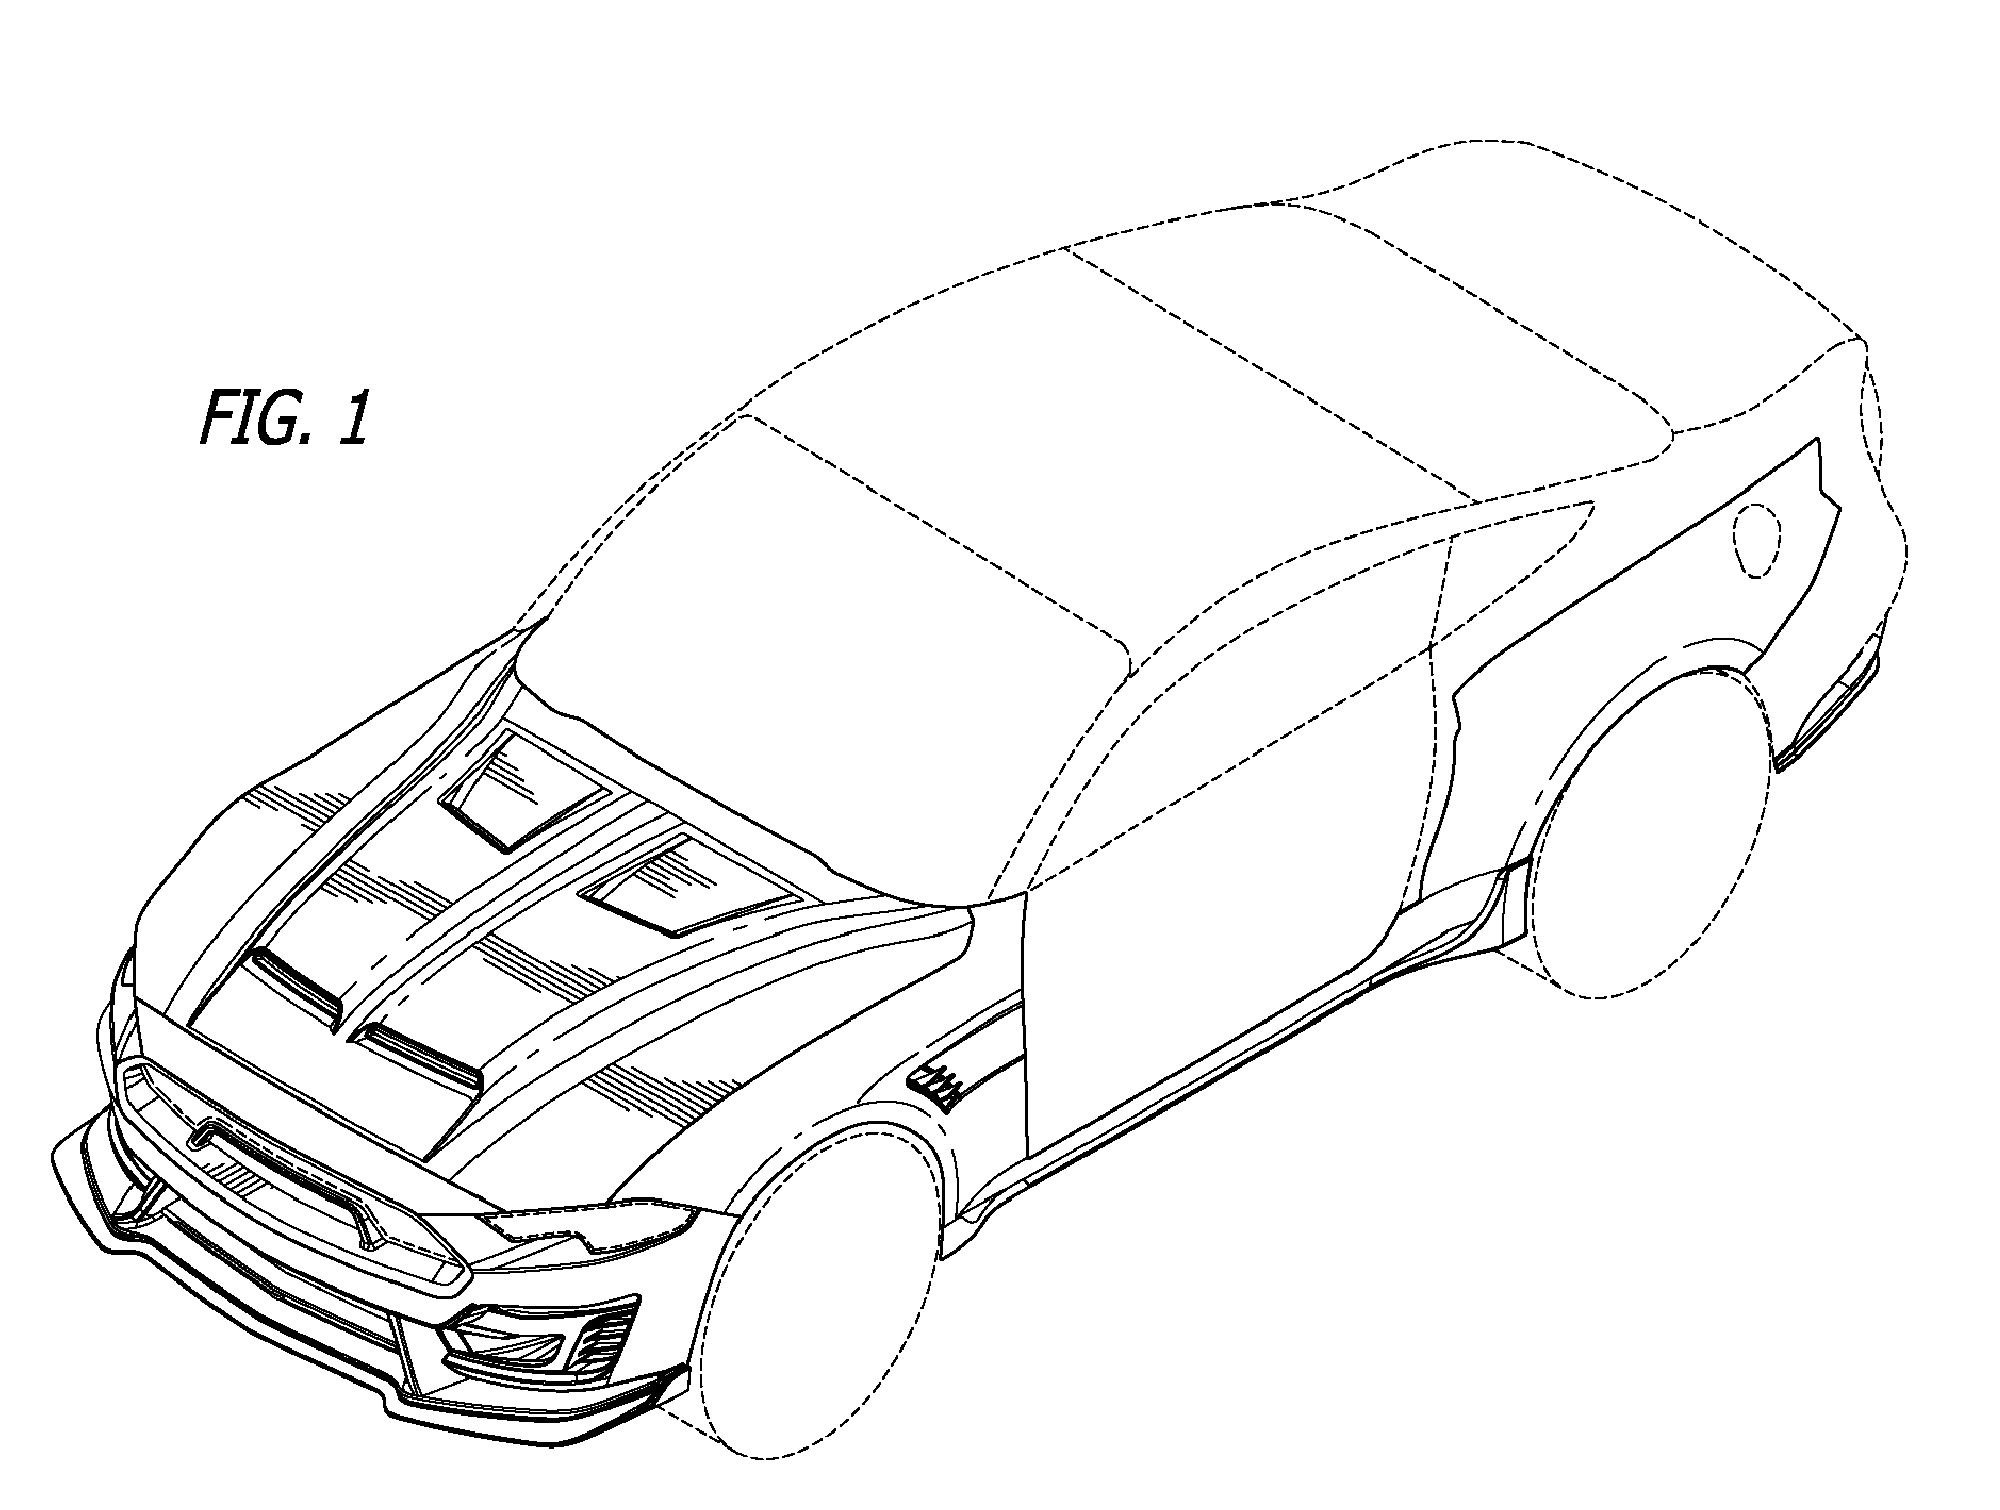 Design Patent Automobile Body Drawing